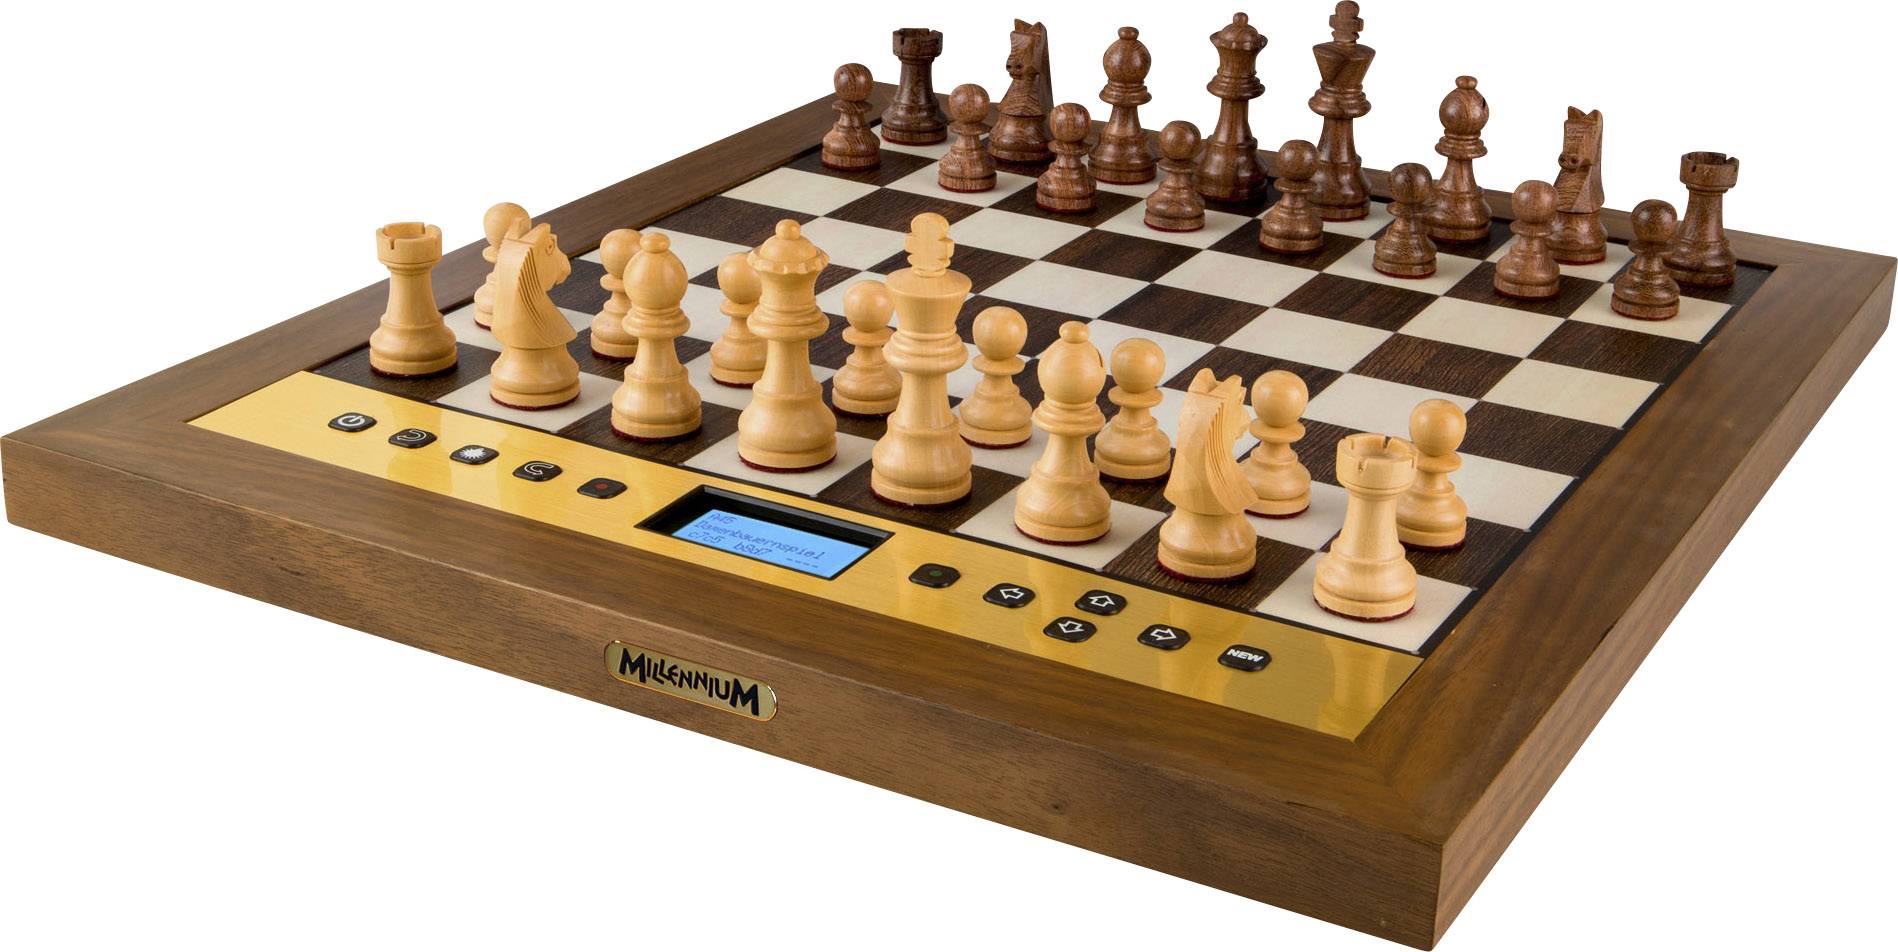 Millennium The King Performance Chess computer